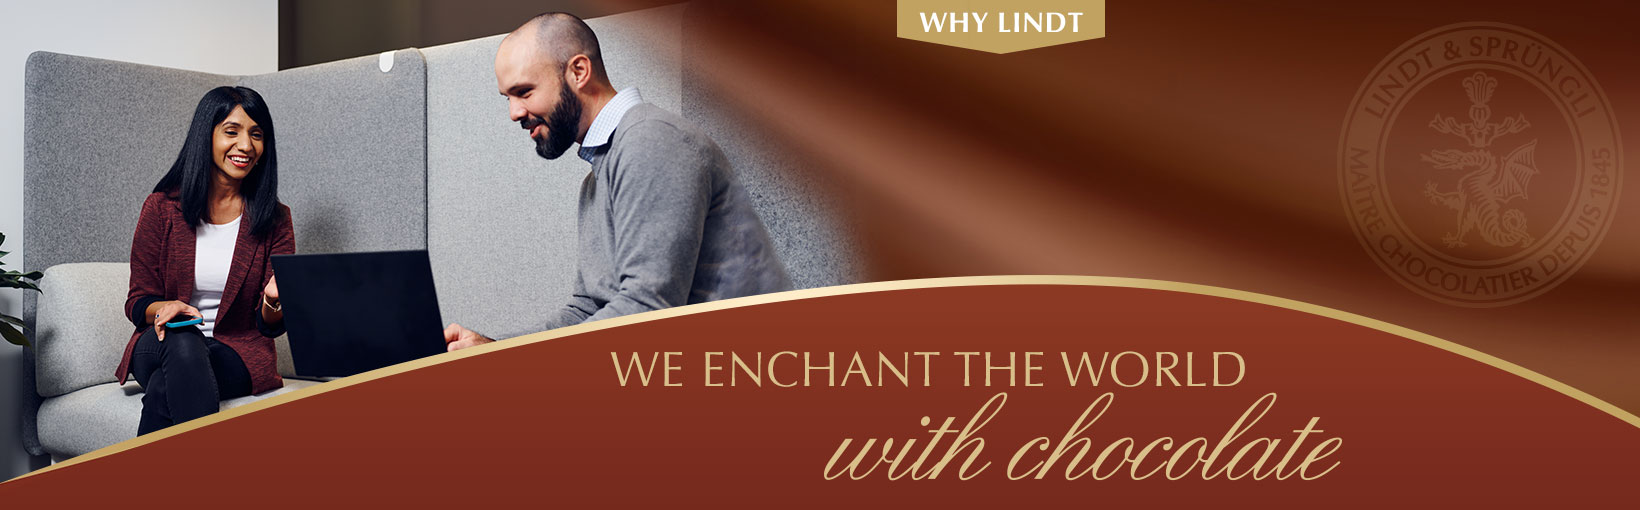 Why Lindt? We enchant the world with chocolate.